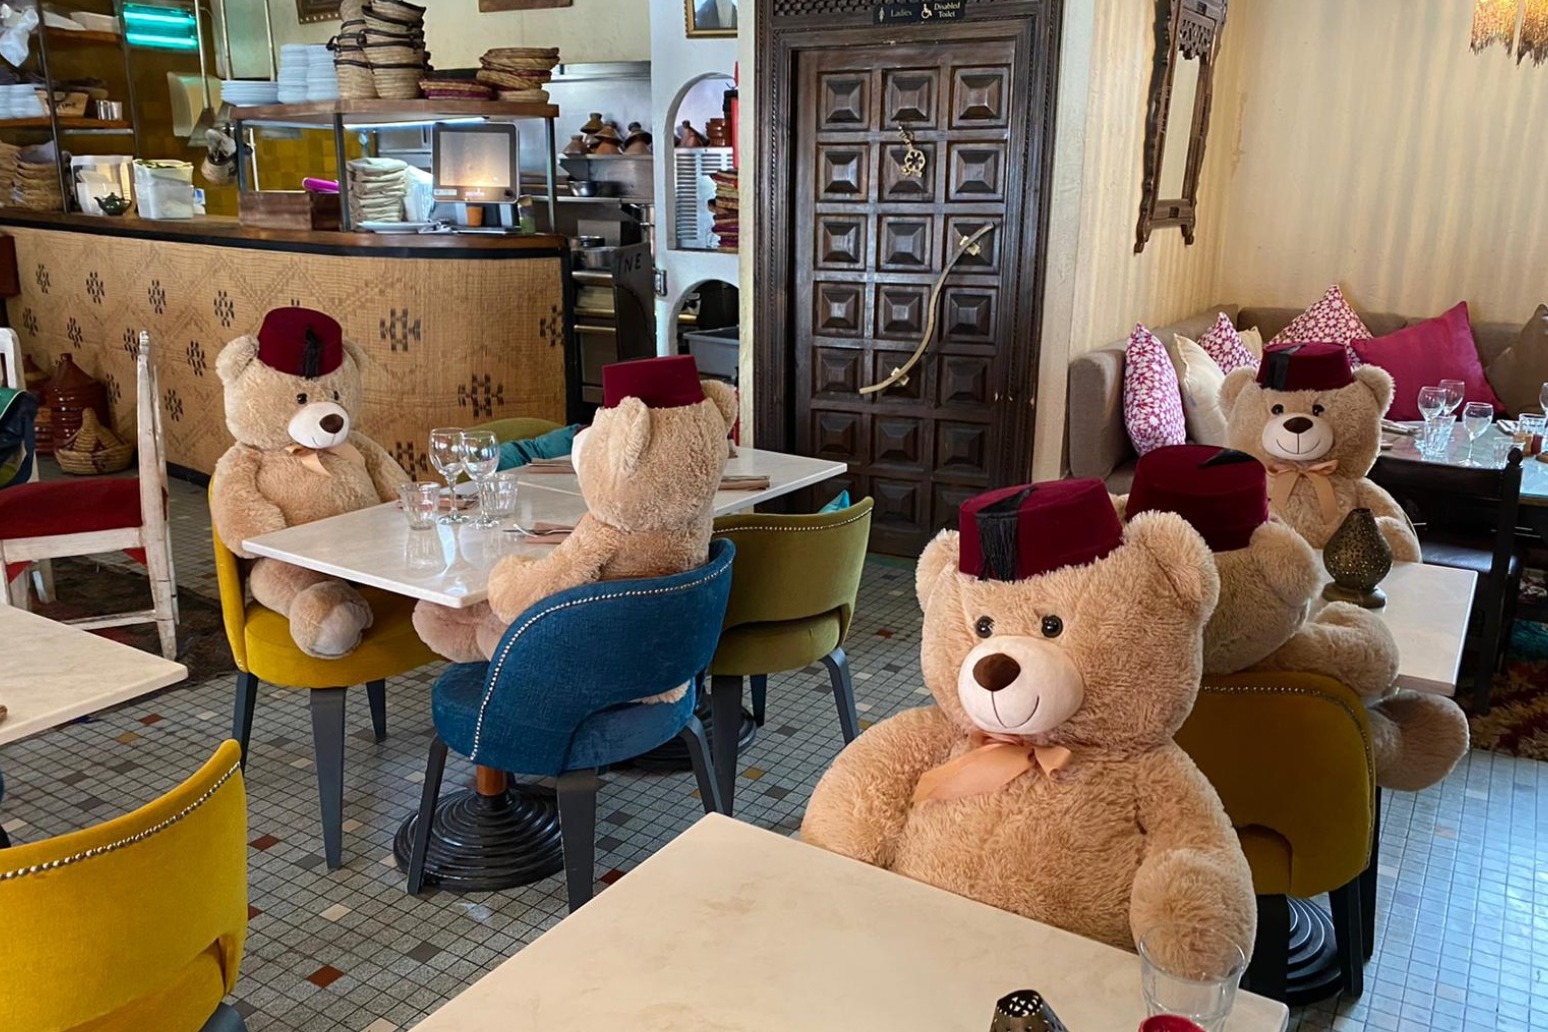 Toy bears brought in to enforce social distancing at Balham restaurant 